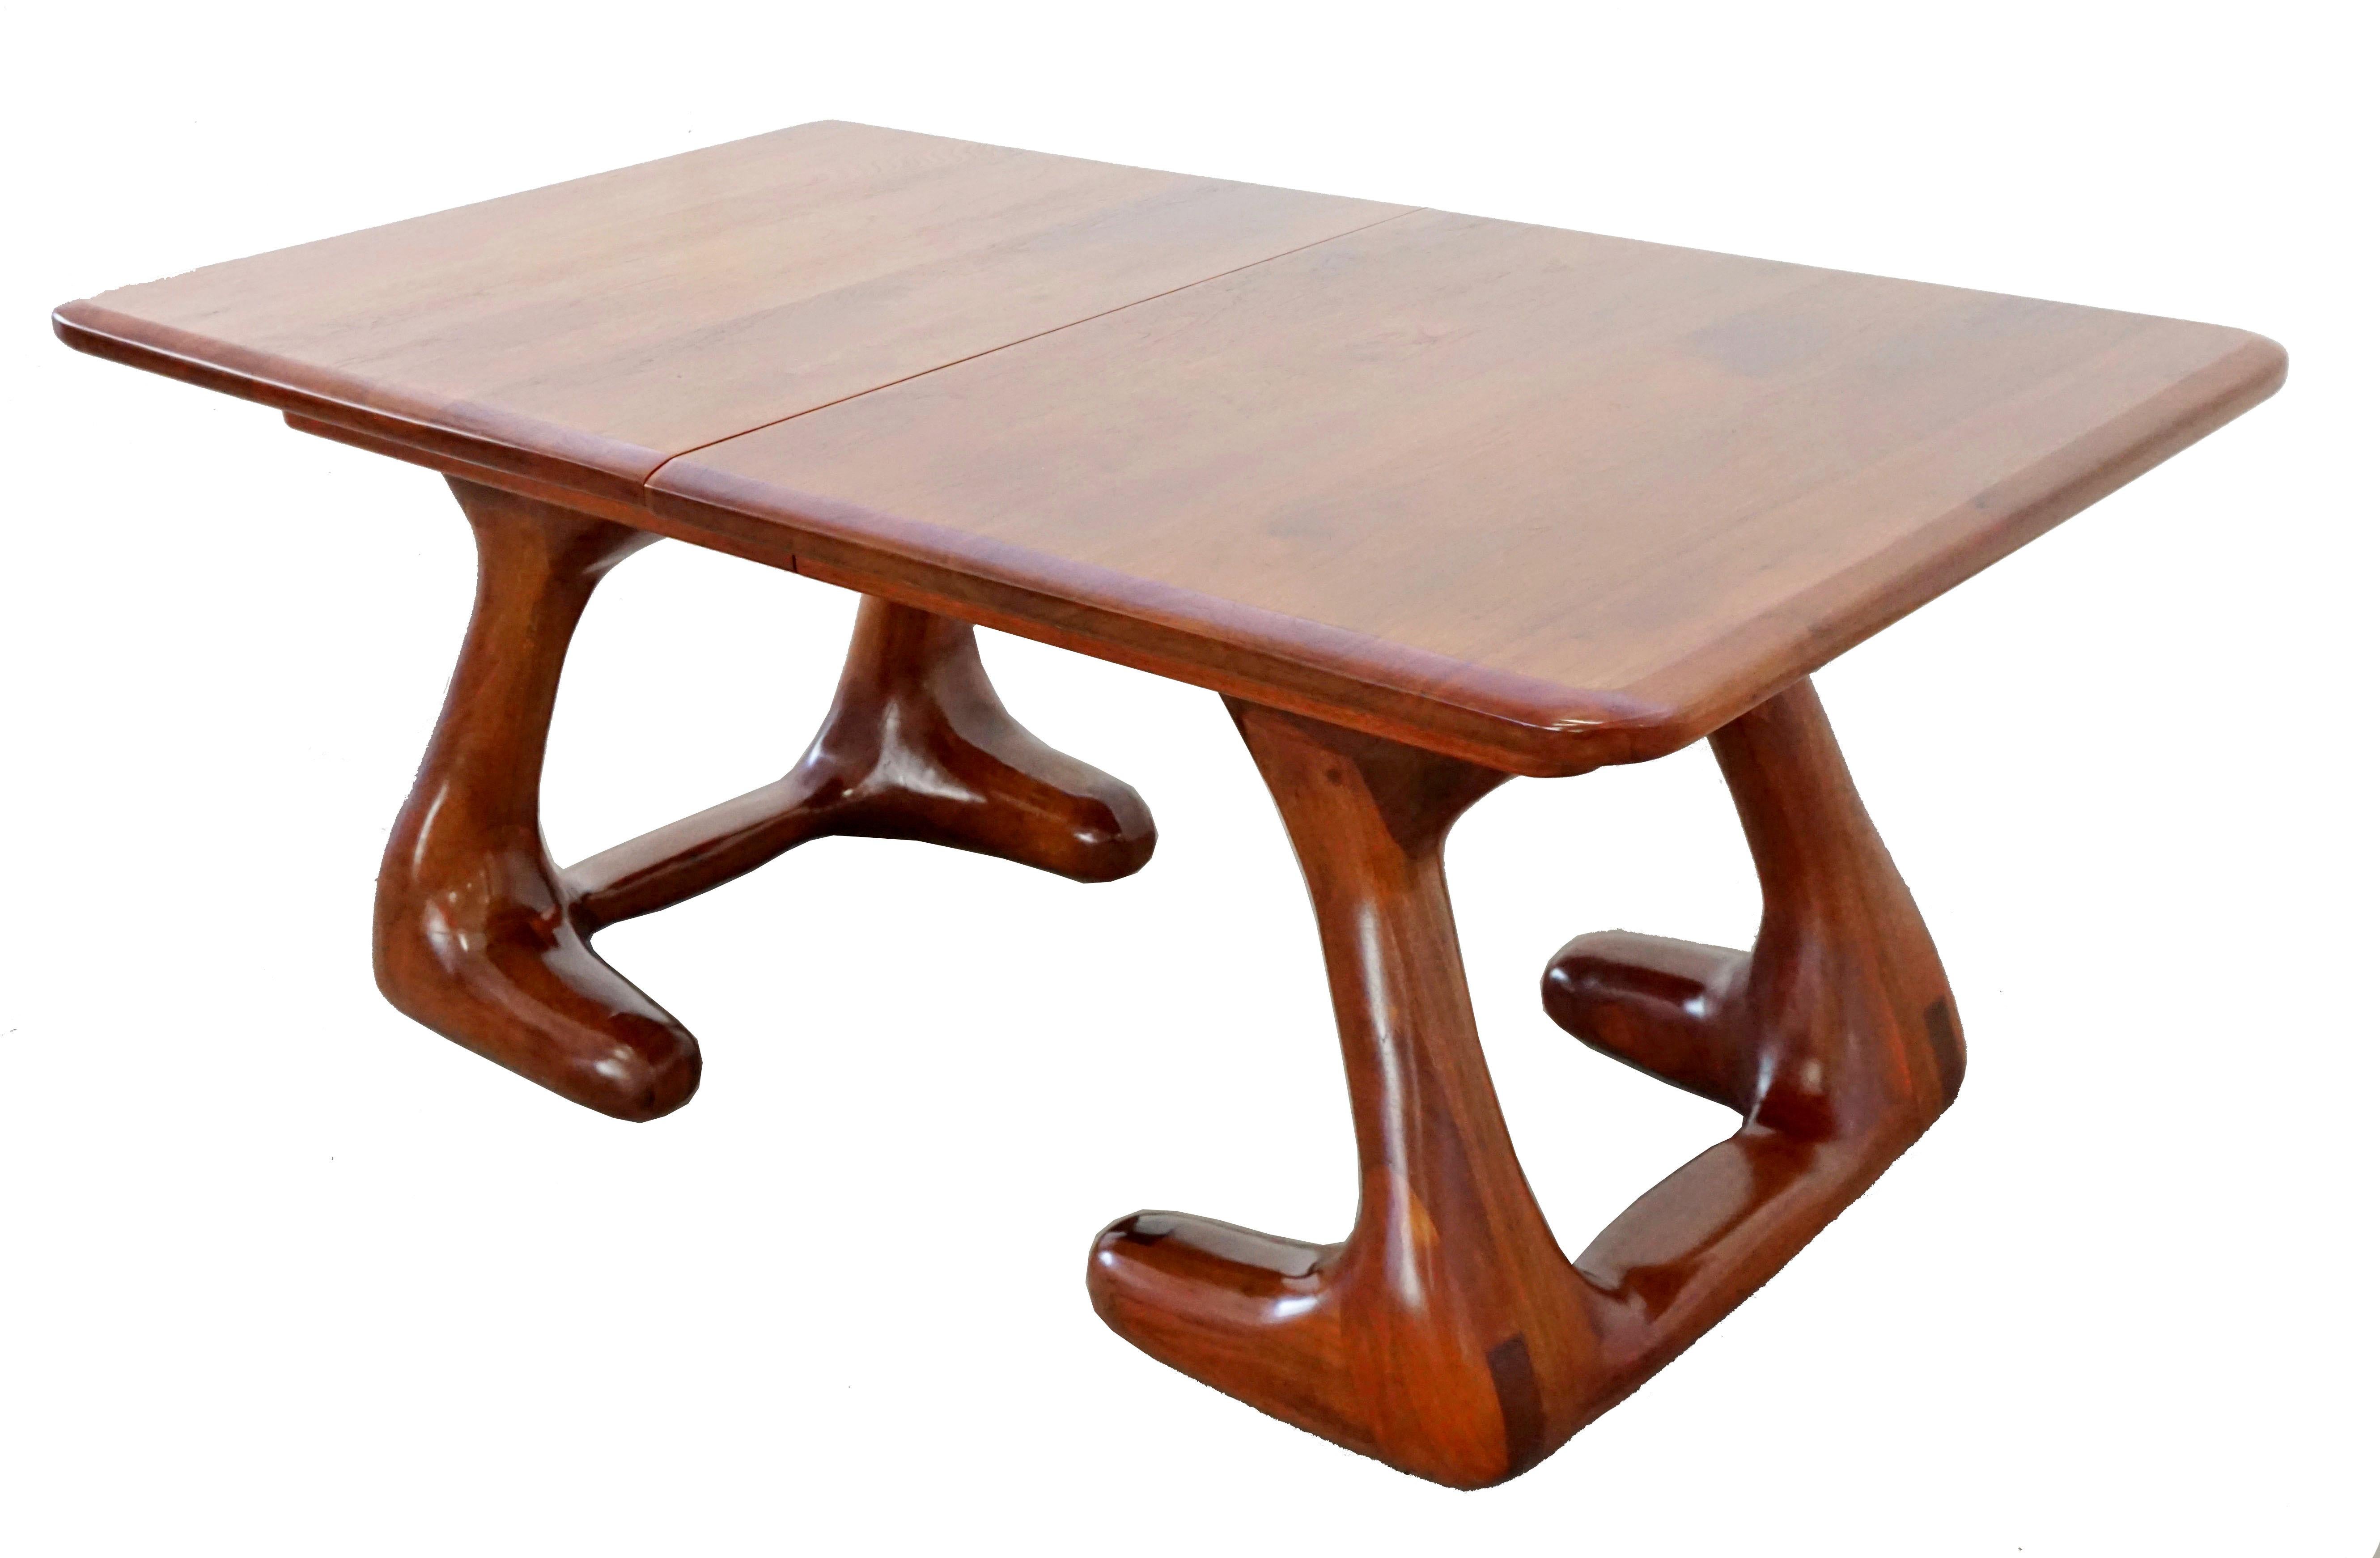 For your consideration is a magnificent American Studio craft carved expandable wooden dining table, with two leaves, in the style of Wendell Castle, circa 1970s. No signature found. In excellent condition. The dimensions are 71